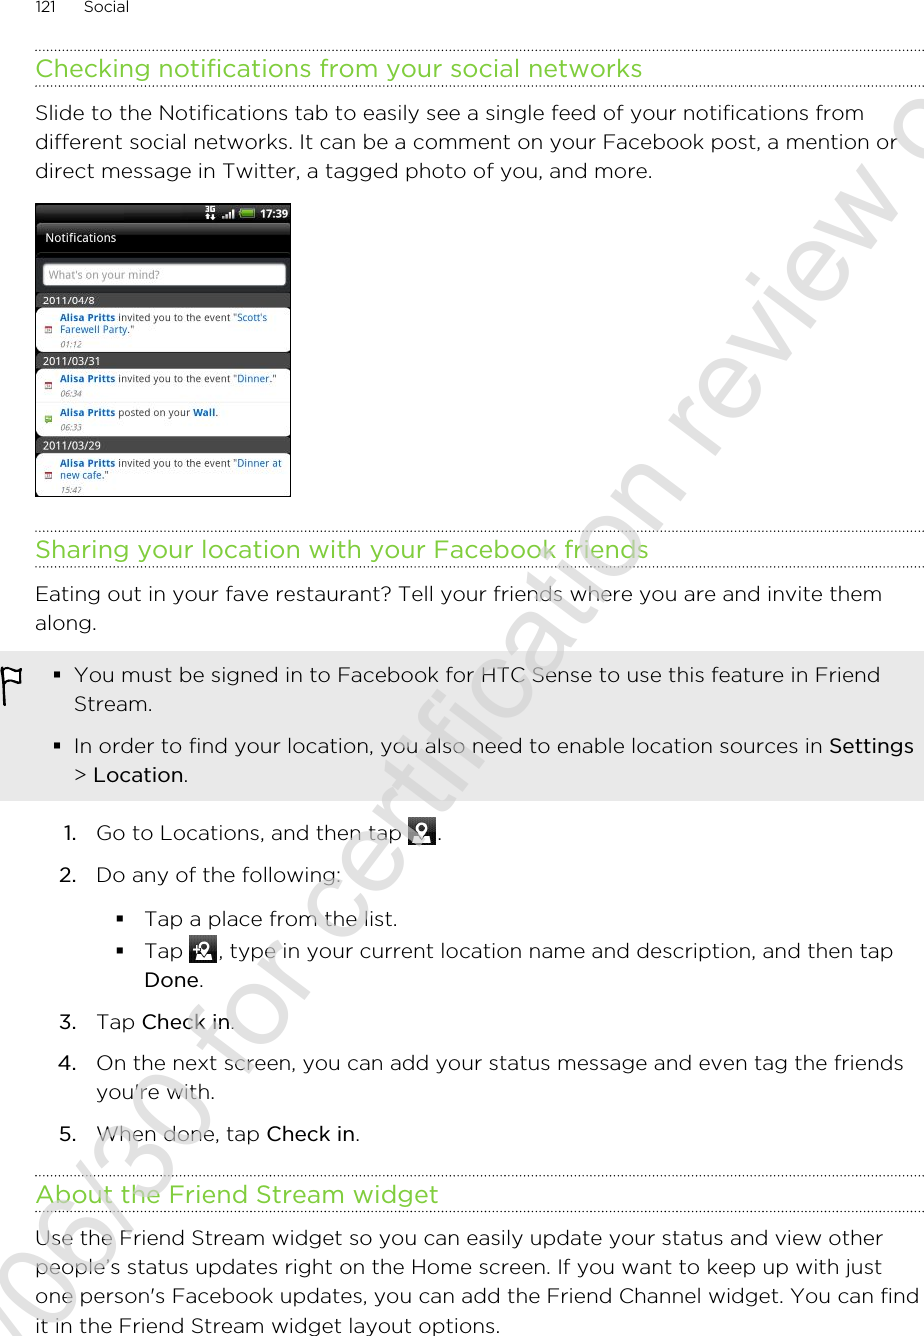 Checking notifications from your social networksSlide to the Notifications tab to easily see a single feed of your notifications fromdifferent social networks. It can be a comment on your Facebook post, a mention ordirect message in Twitter, a tagged photo of you, and more.Sharing your location with your Facebook friendsEating out in your fave restaurant? Tell your friends where you are and invite themalong.§You must be signed in to Facebook for HTC Sense to use this feature in FriendStream.§In order to find your location, you also need to enable location sources in Settings&gt; Location.1. Go to Locations, and then tap  .2. Do any of the following:§Tap a place from the list.§Tap  , type in your current location name and description, and then tapDone.3. Tap Check in.4. On the next screen, you can add your status message and even tag the friendsyou&apos;re with.5. When done, tap Check in.About the Friend Stream widgetUse the Friend Stream widget so you can easily update your status and view otherpeople’s status updates right on the Home screen. If you want to keep up with justone person&apos;s Facebook updates, you can add the Friend Channel widget. You can findit in the Friend Stream widget layout options.121 Social2011/06/30 for certification review only